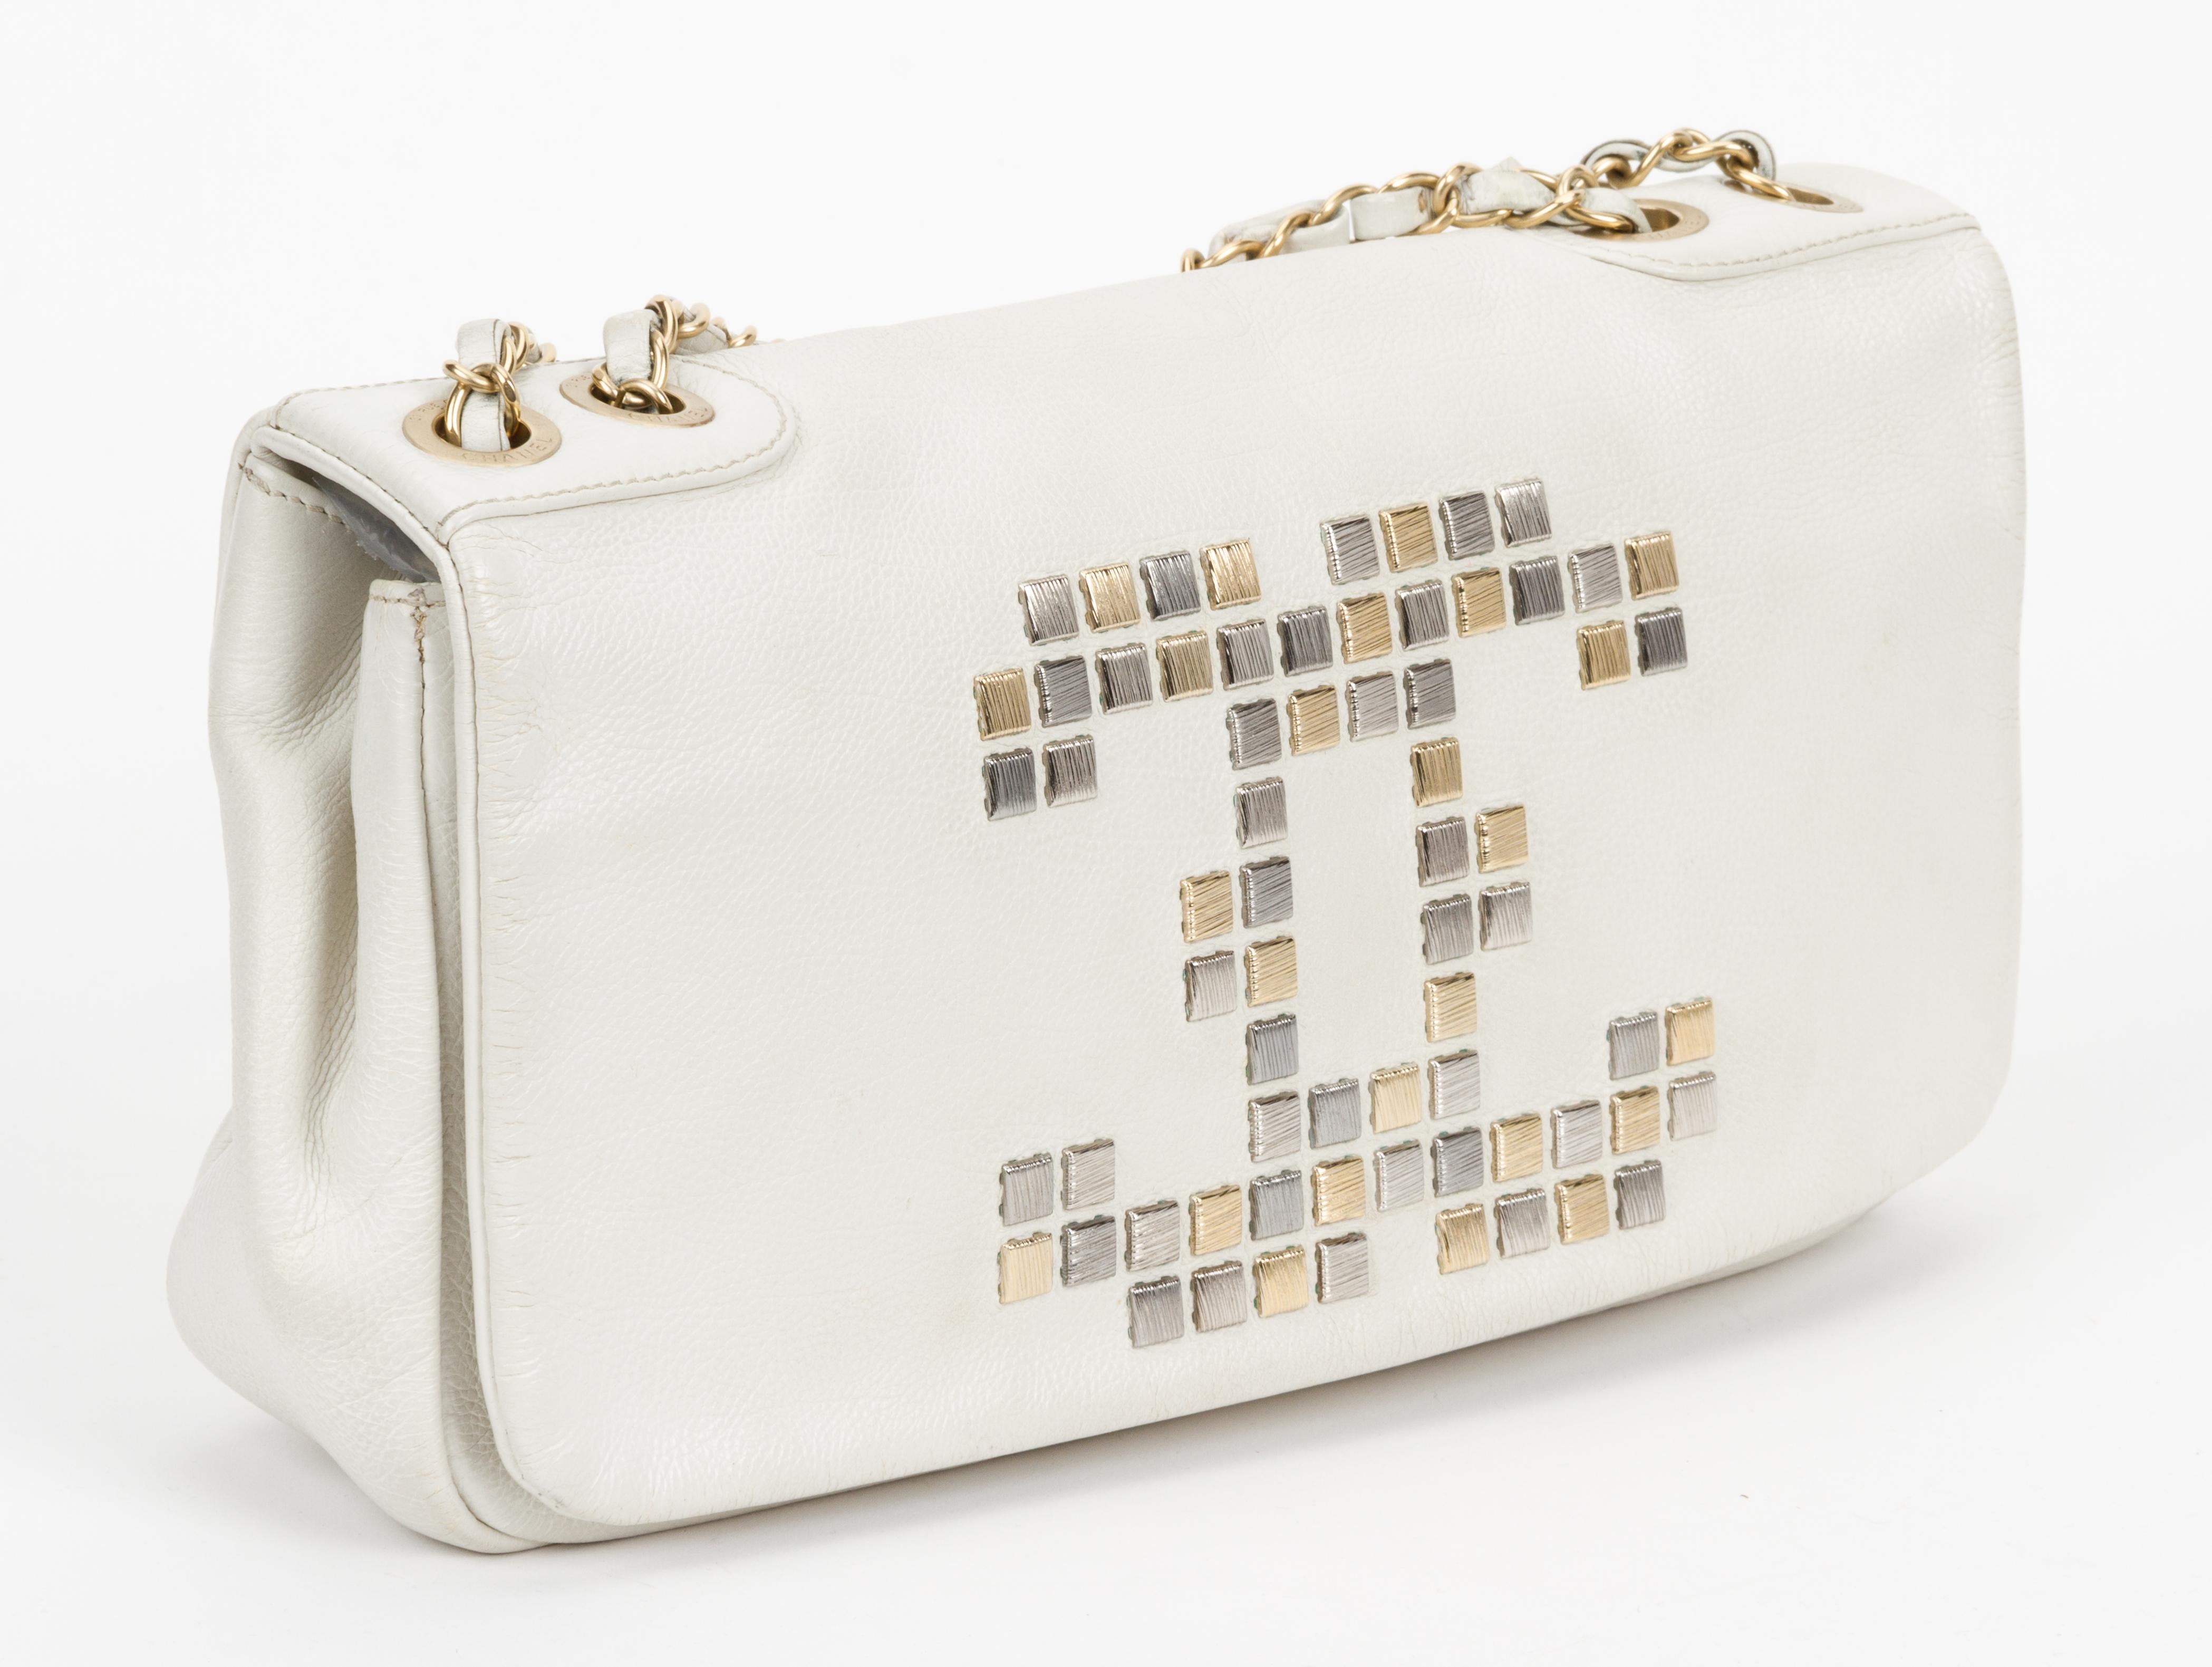 Chanel off white pebbled leather shoulder bag with gold and silver mosaic CC logo design. Shoulder drop 9